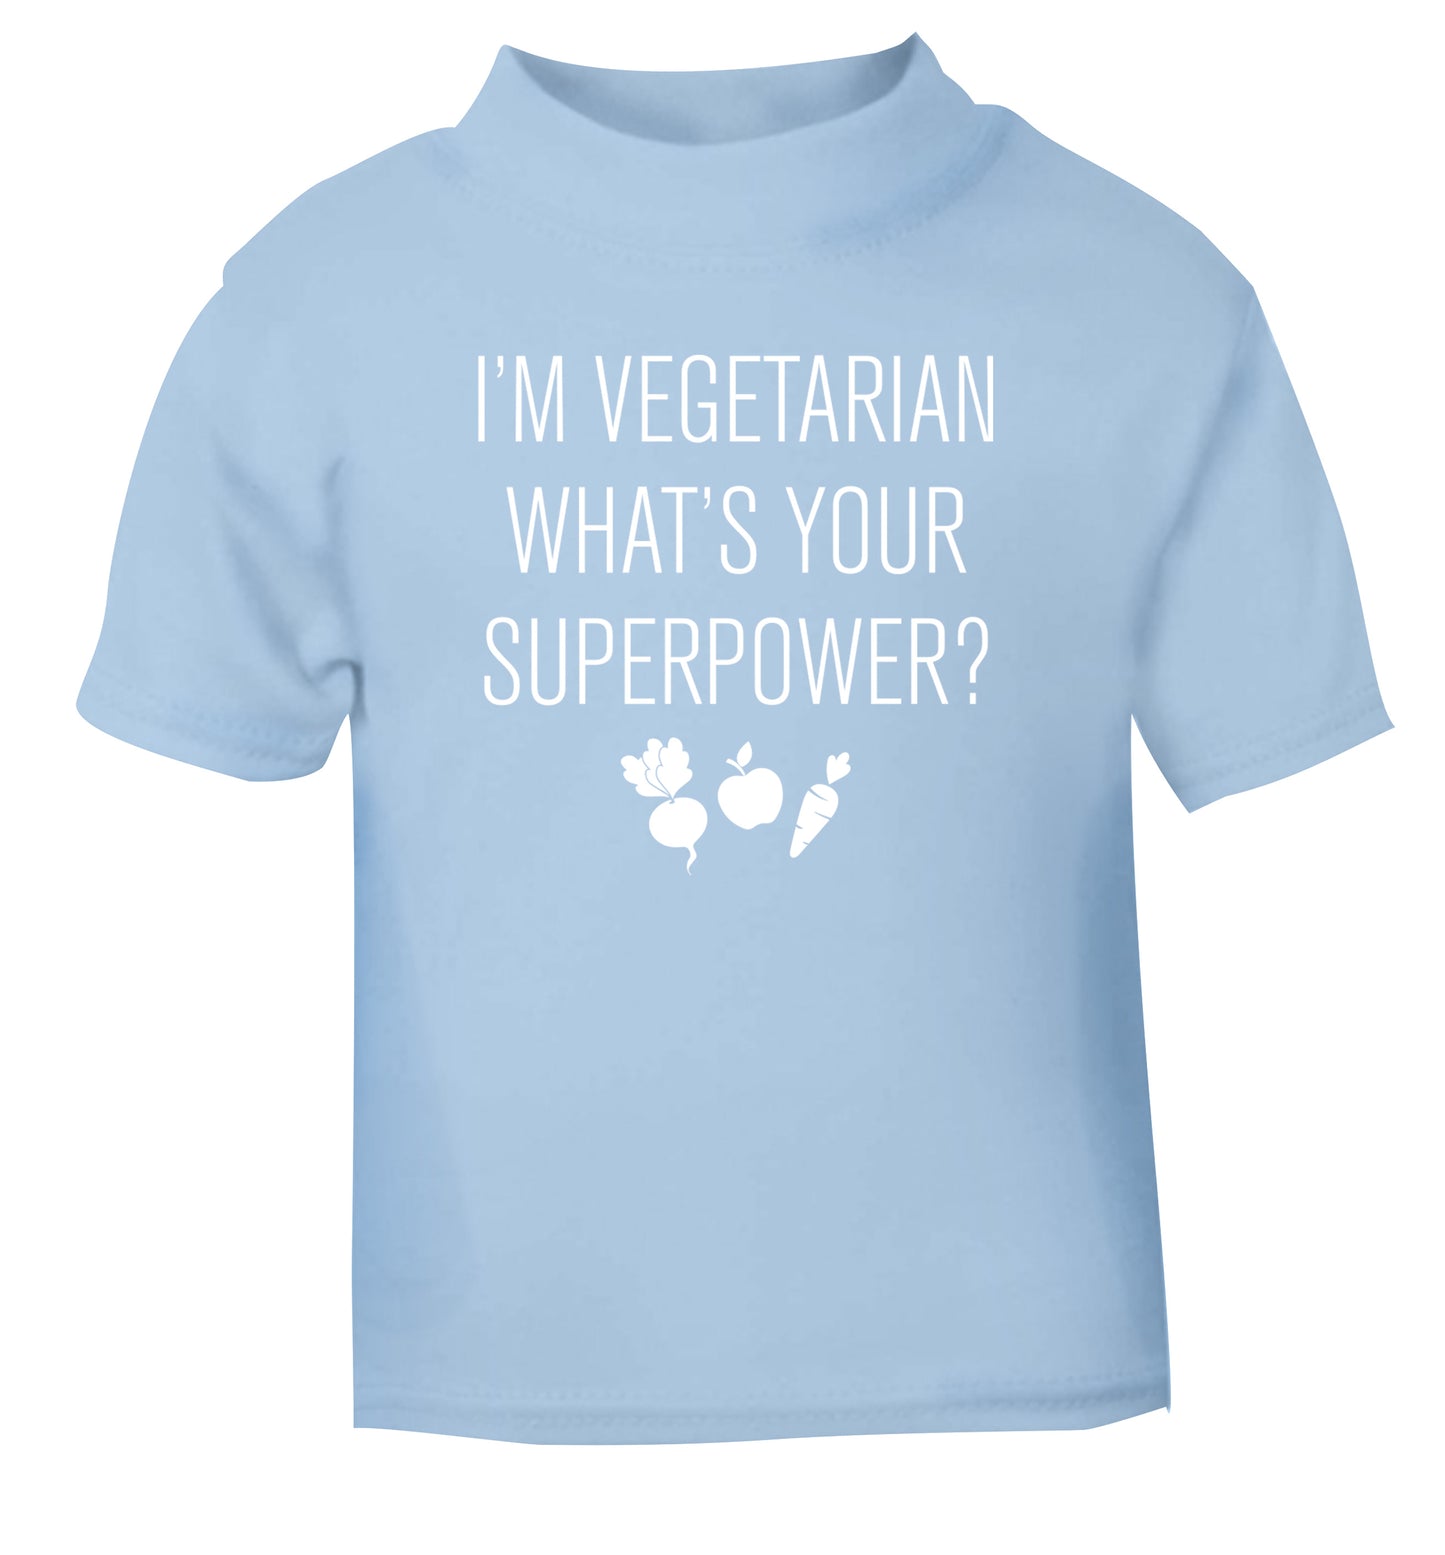 I'm vegetarian what's your superpower? light blue Baby Toddler Tshirt 2 Years